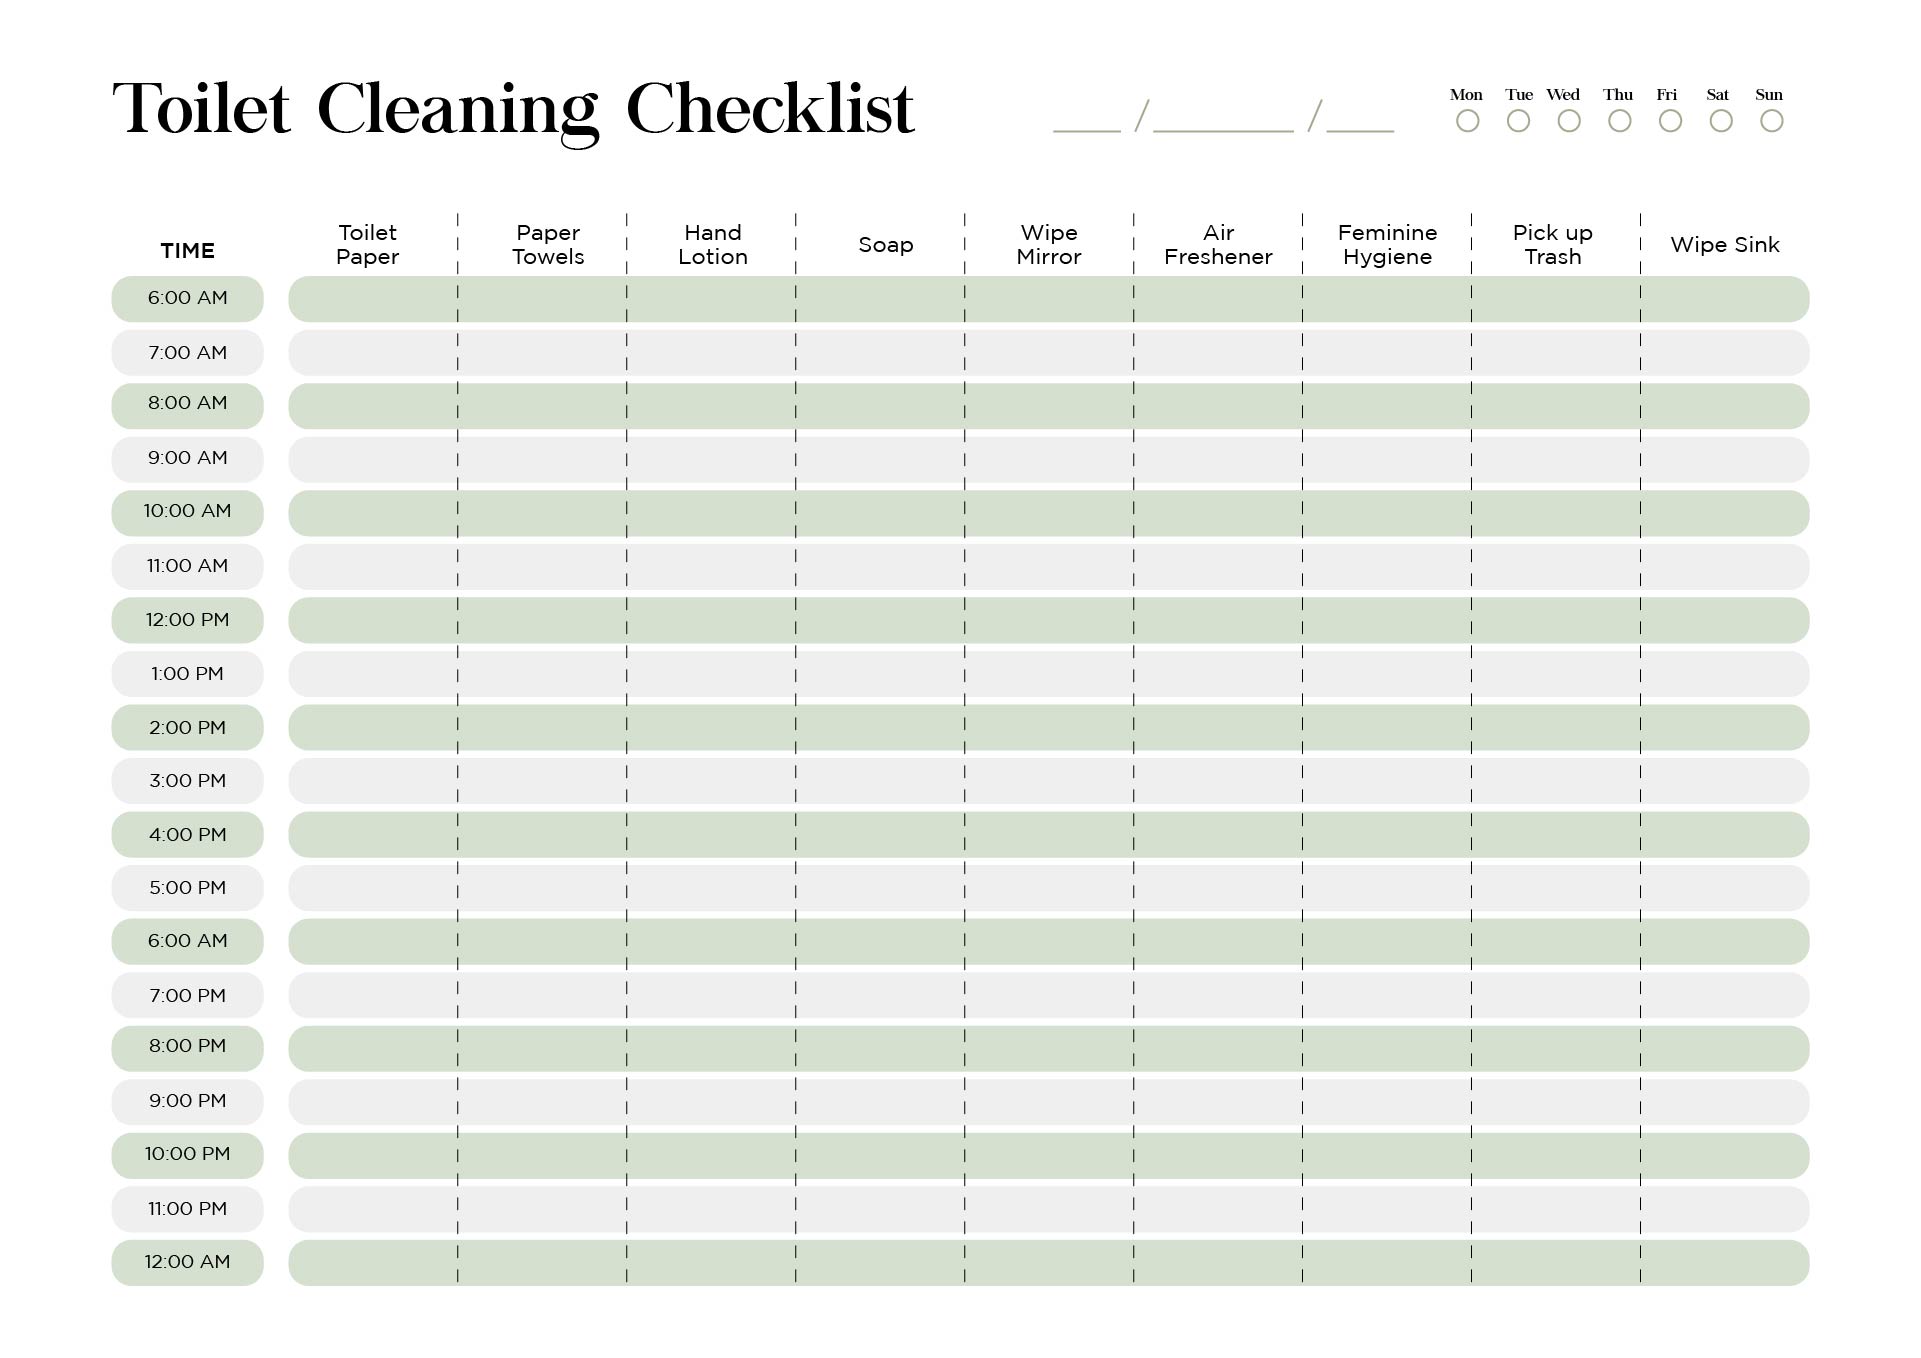 8 Best Images of Restroom Cleaning Schedule Printable Daily Bathroom